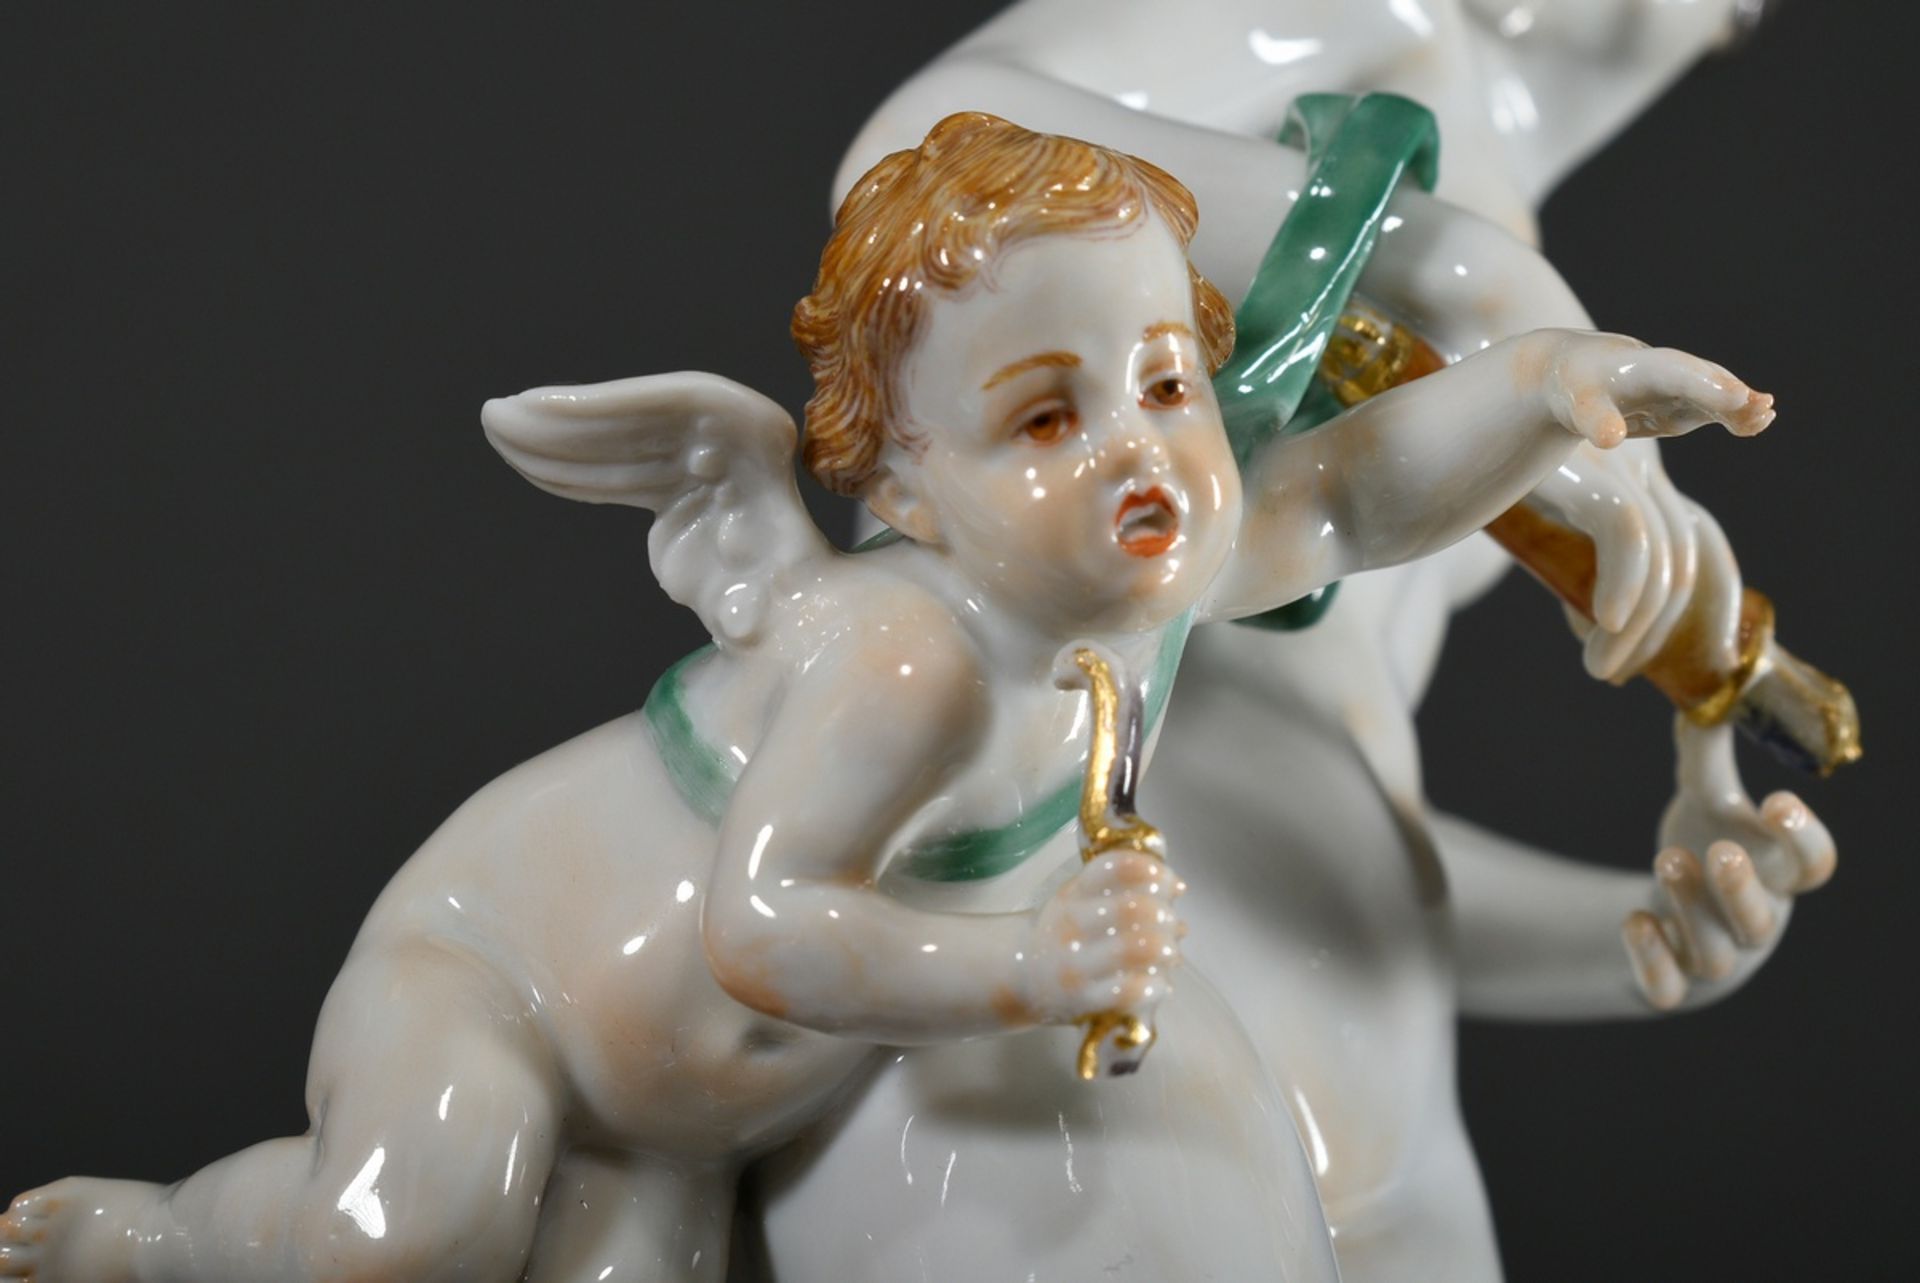 Meissen figurine "Venus with Cupids", model by Johann Joachim Kaendler 1765, colorfully painted and - Image 9 of 9